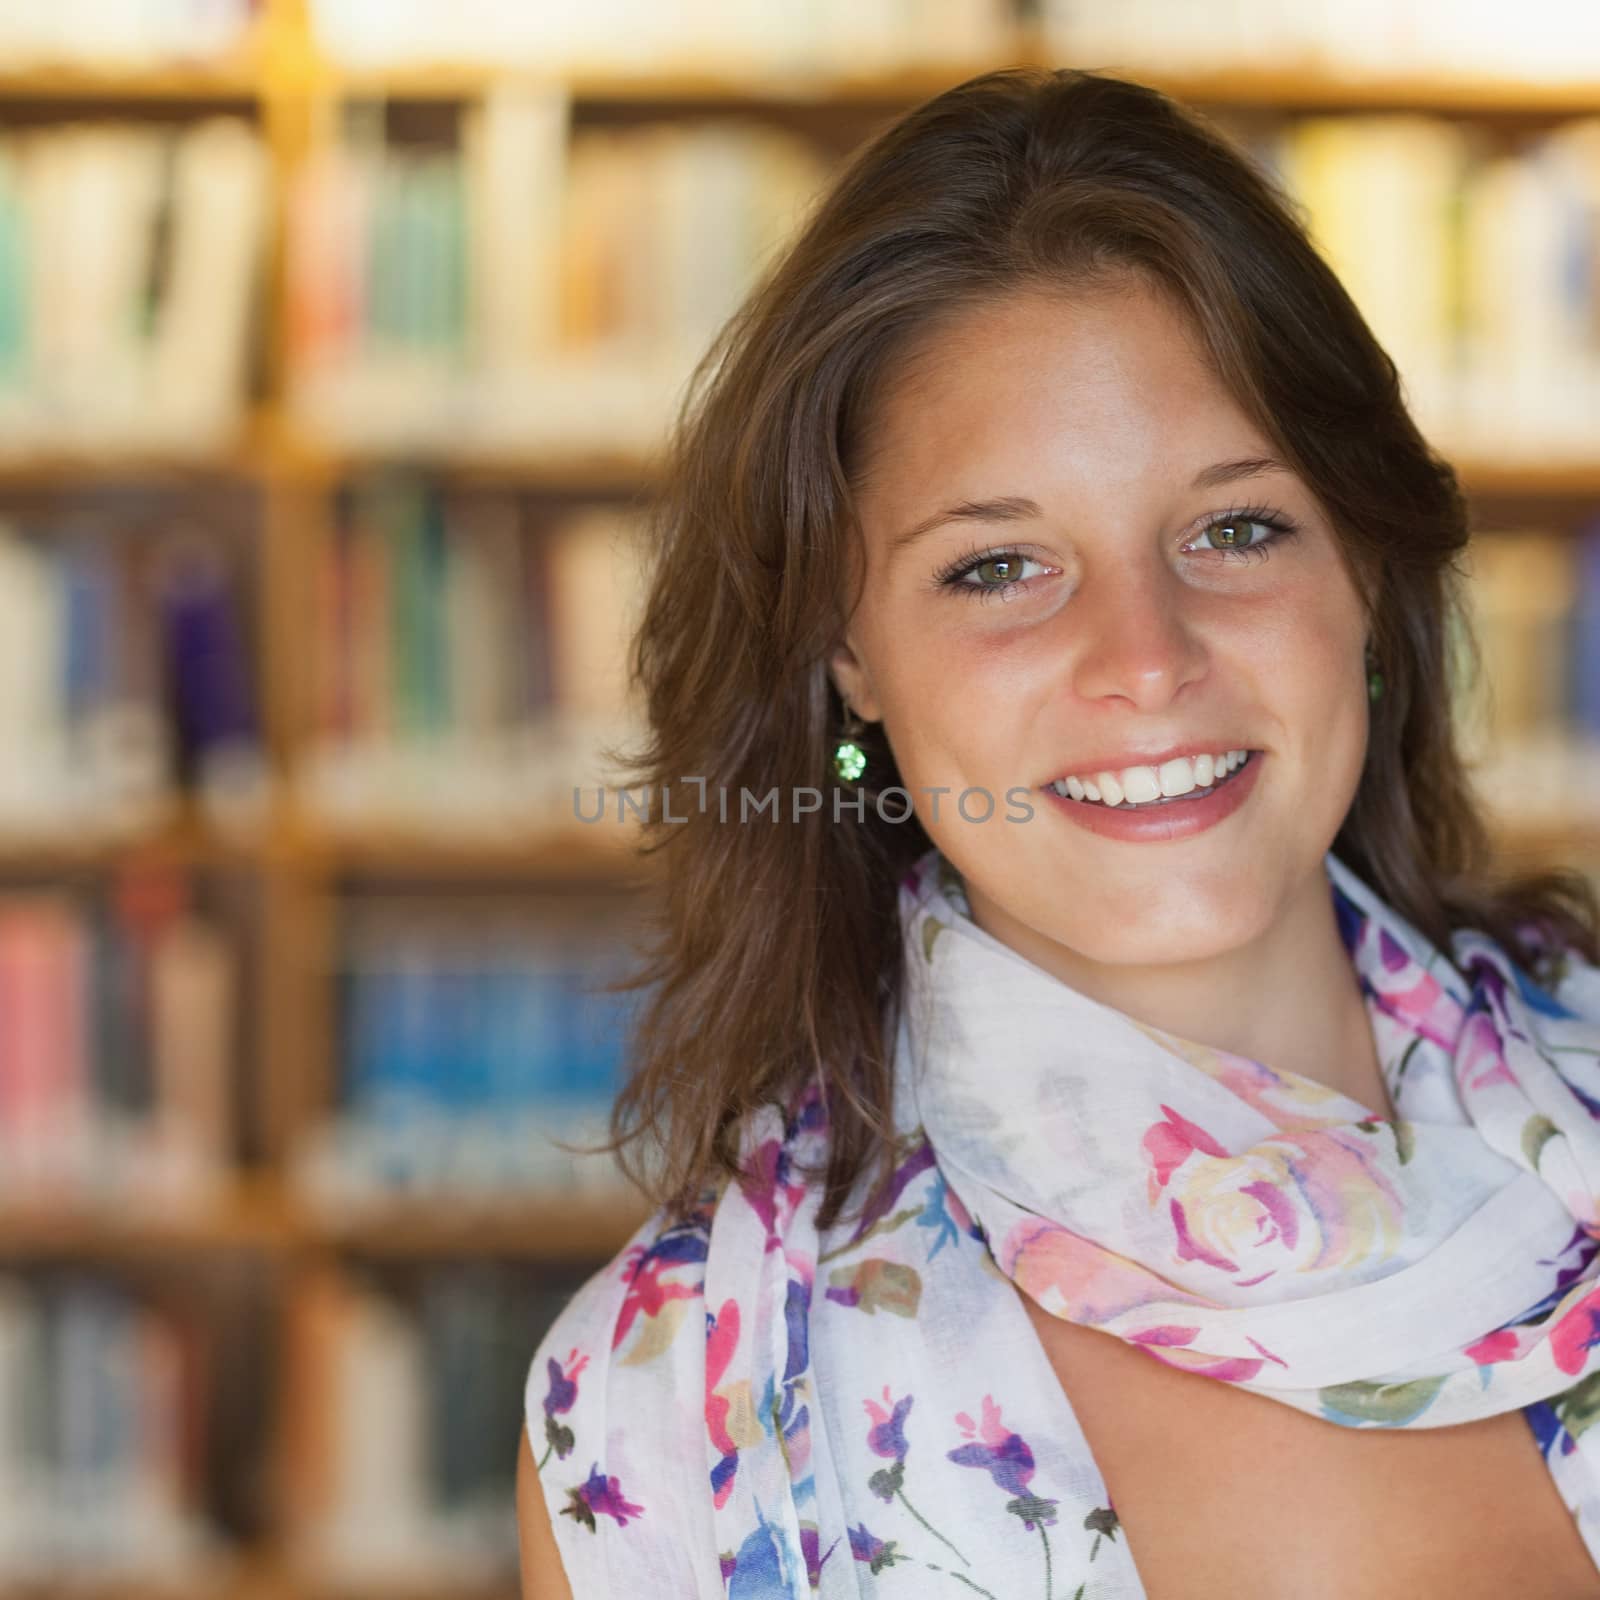 Close up portrait of a smiling female student in the library